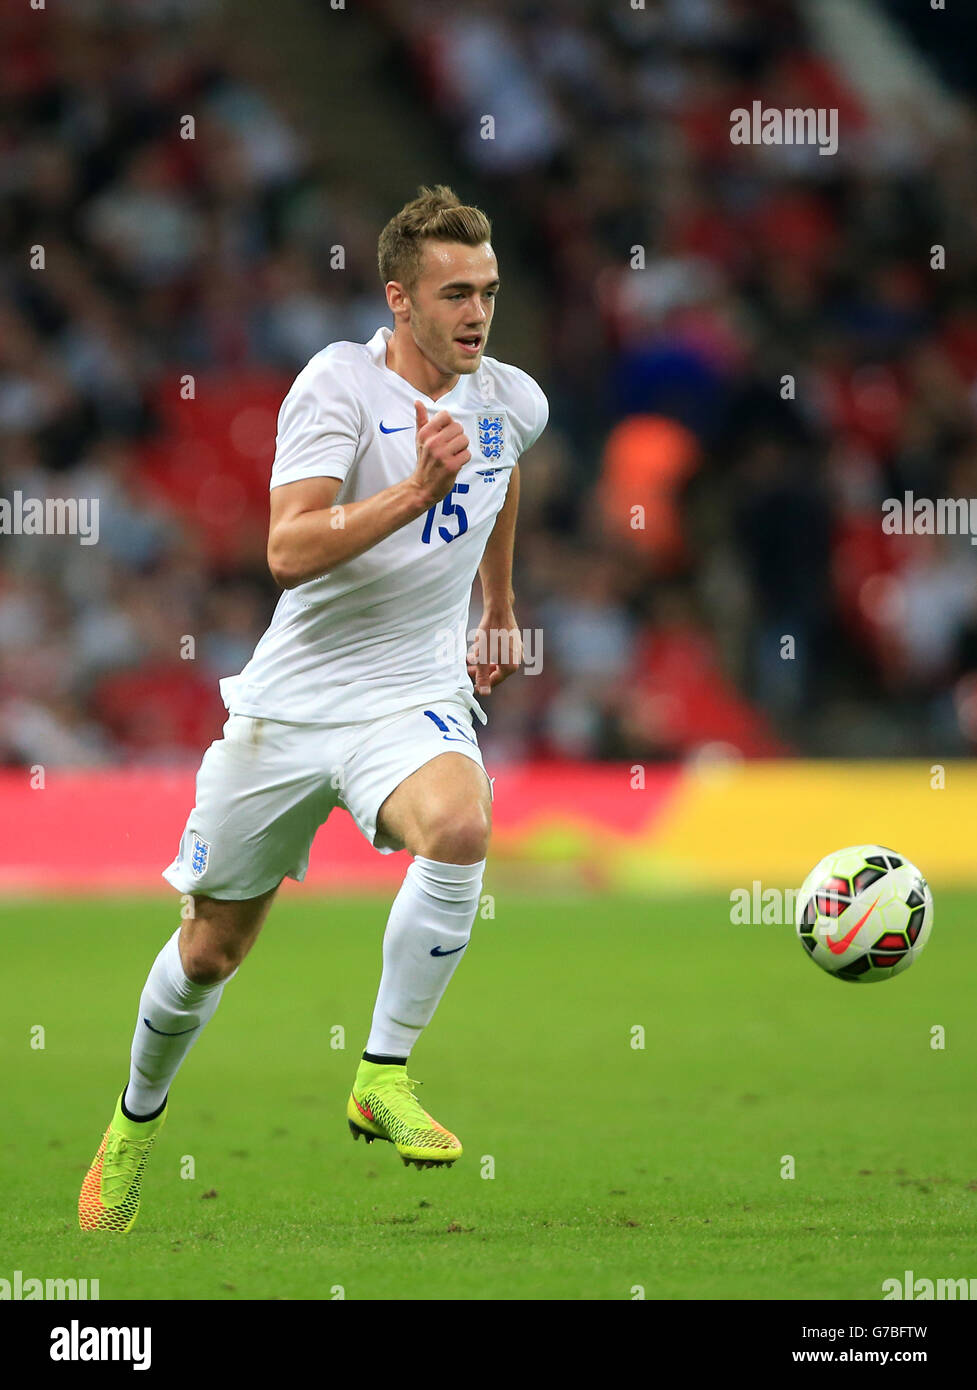 England's Calum Chambers during the International Friendly at Wembley Stadium, London. PRESS ASSOCIATION Photo. Picture date: Wednesday September 3, 2014. See PA story SOCCER England. Photo credit should read: Nick Potts/PA Wire. Stock Photo